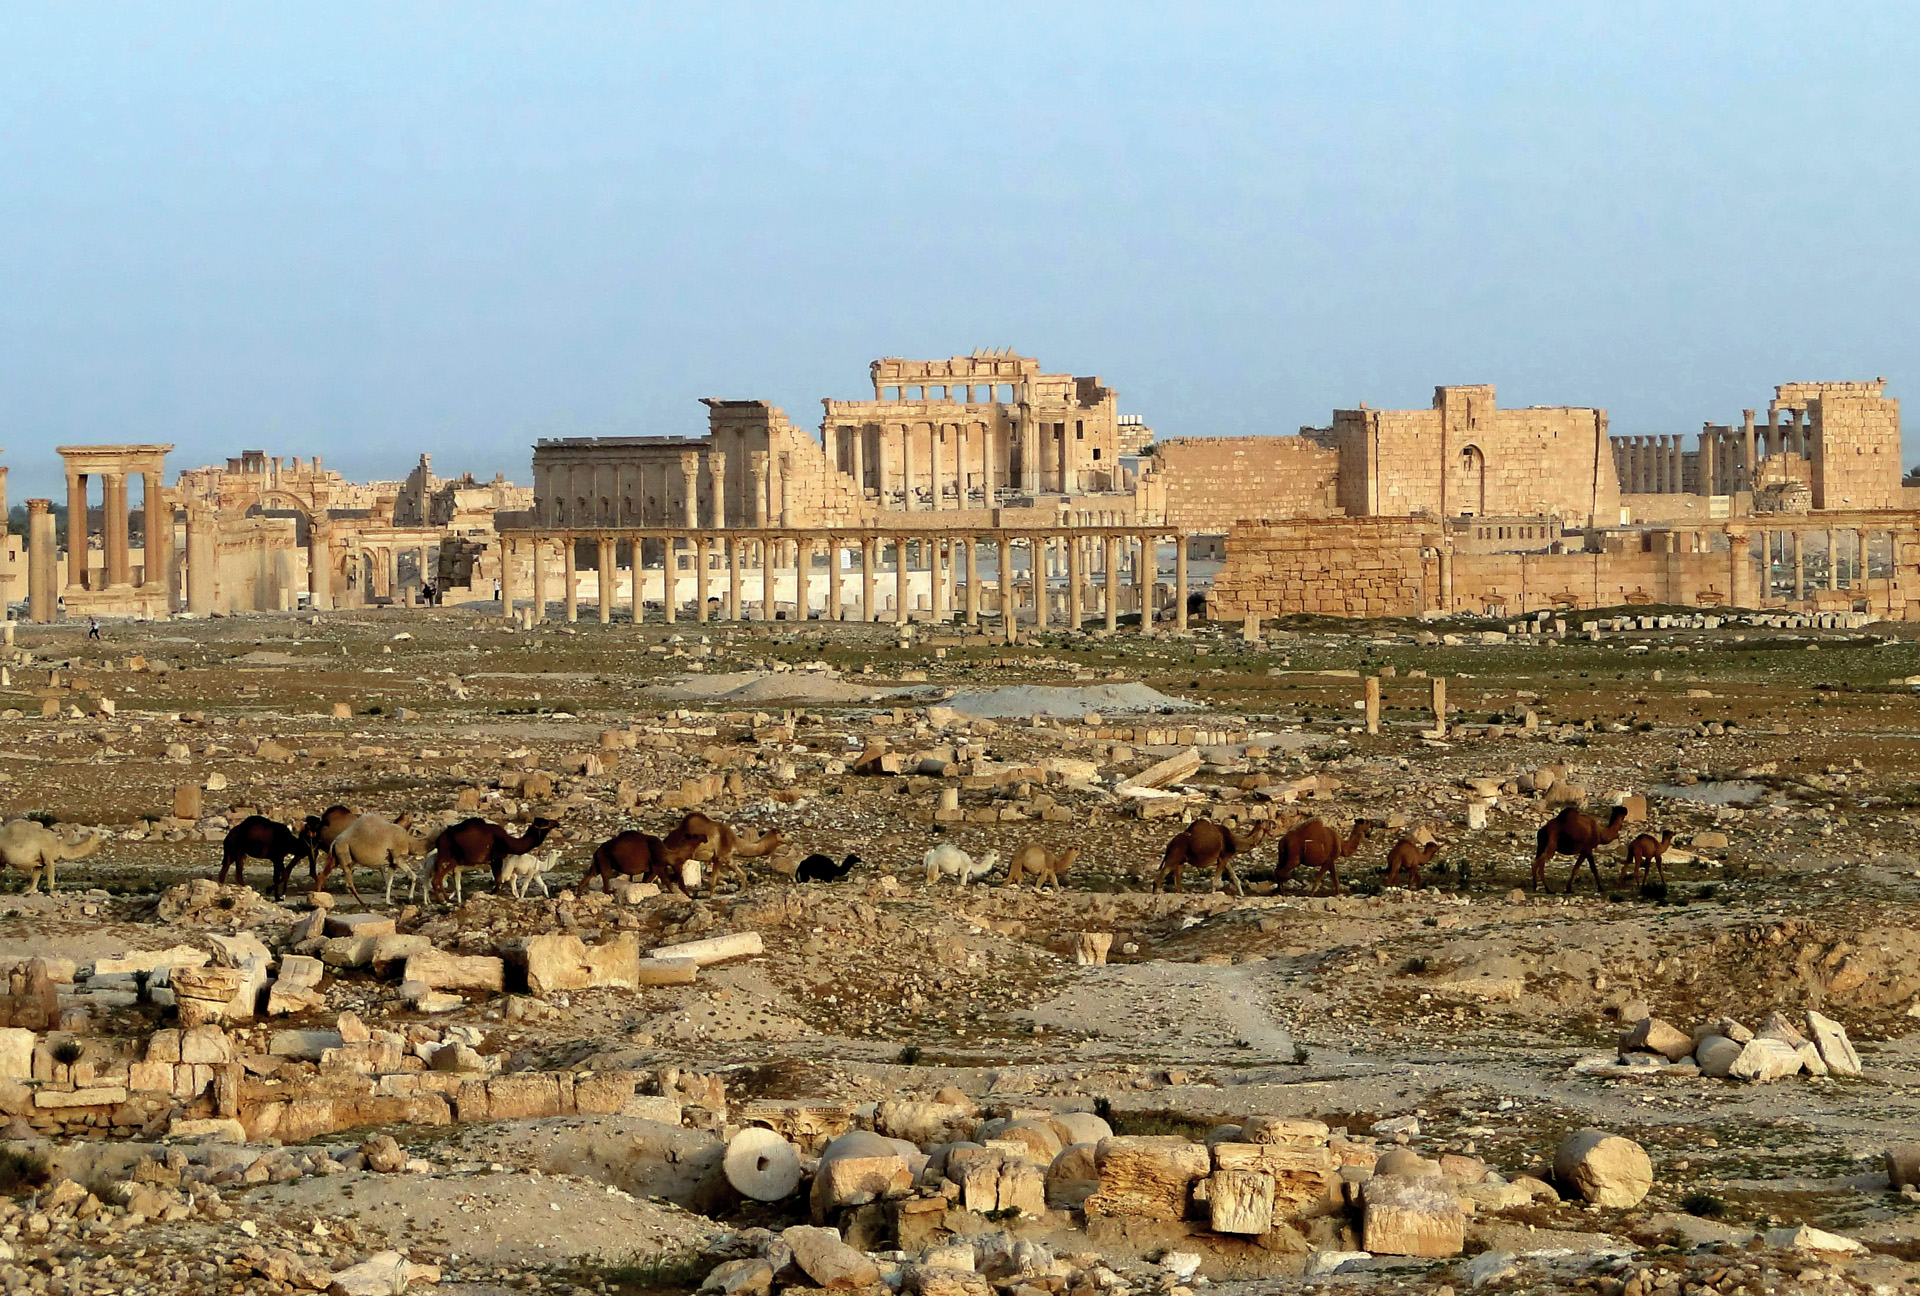 Ruins of Palmyra in modern Syria, including the Temple of Bel complex and the agora. Initially spared by Emperor Aurelian, the city was later destroyed when its inhabitants again rebelled against Rome.